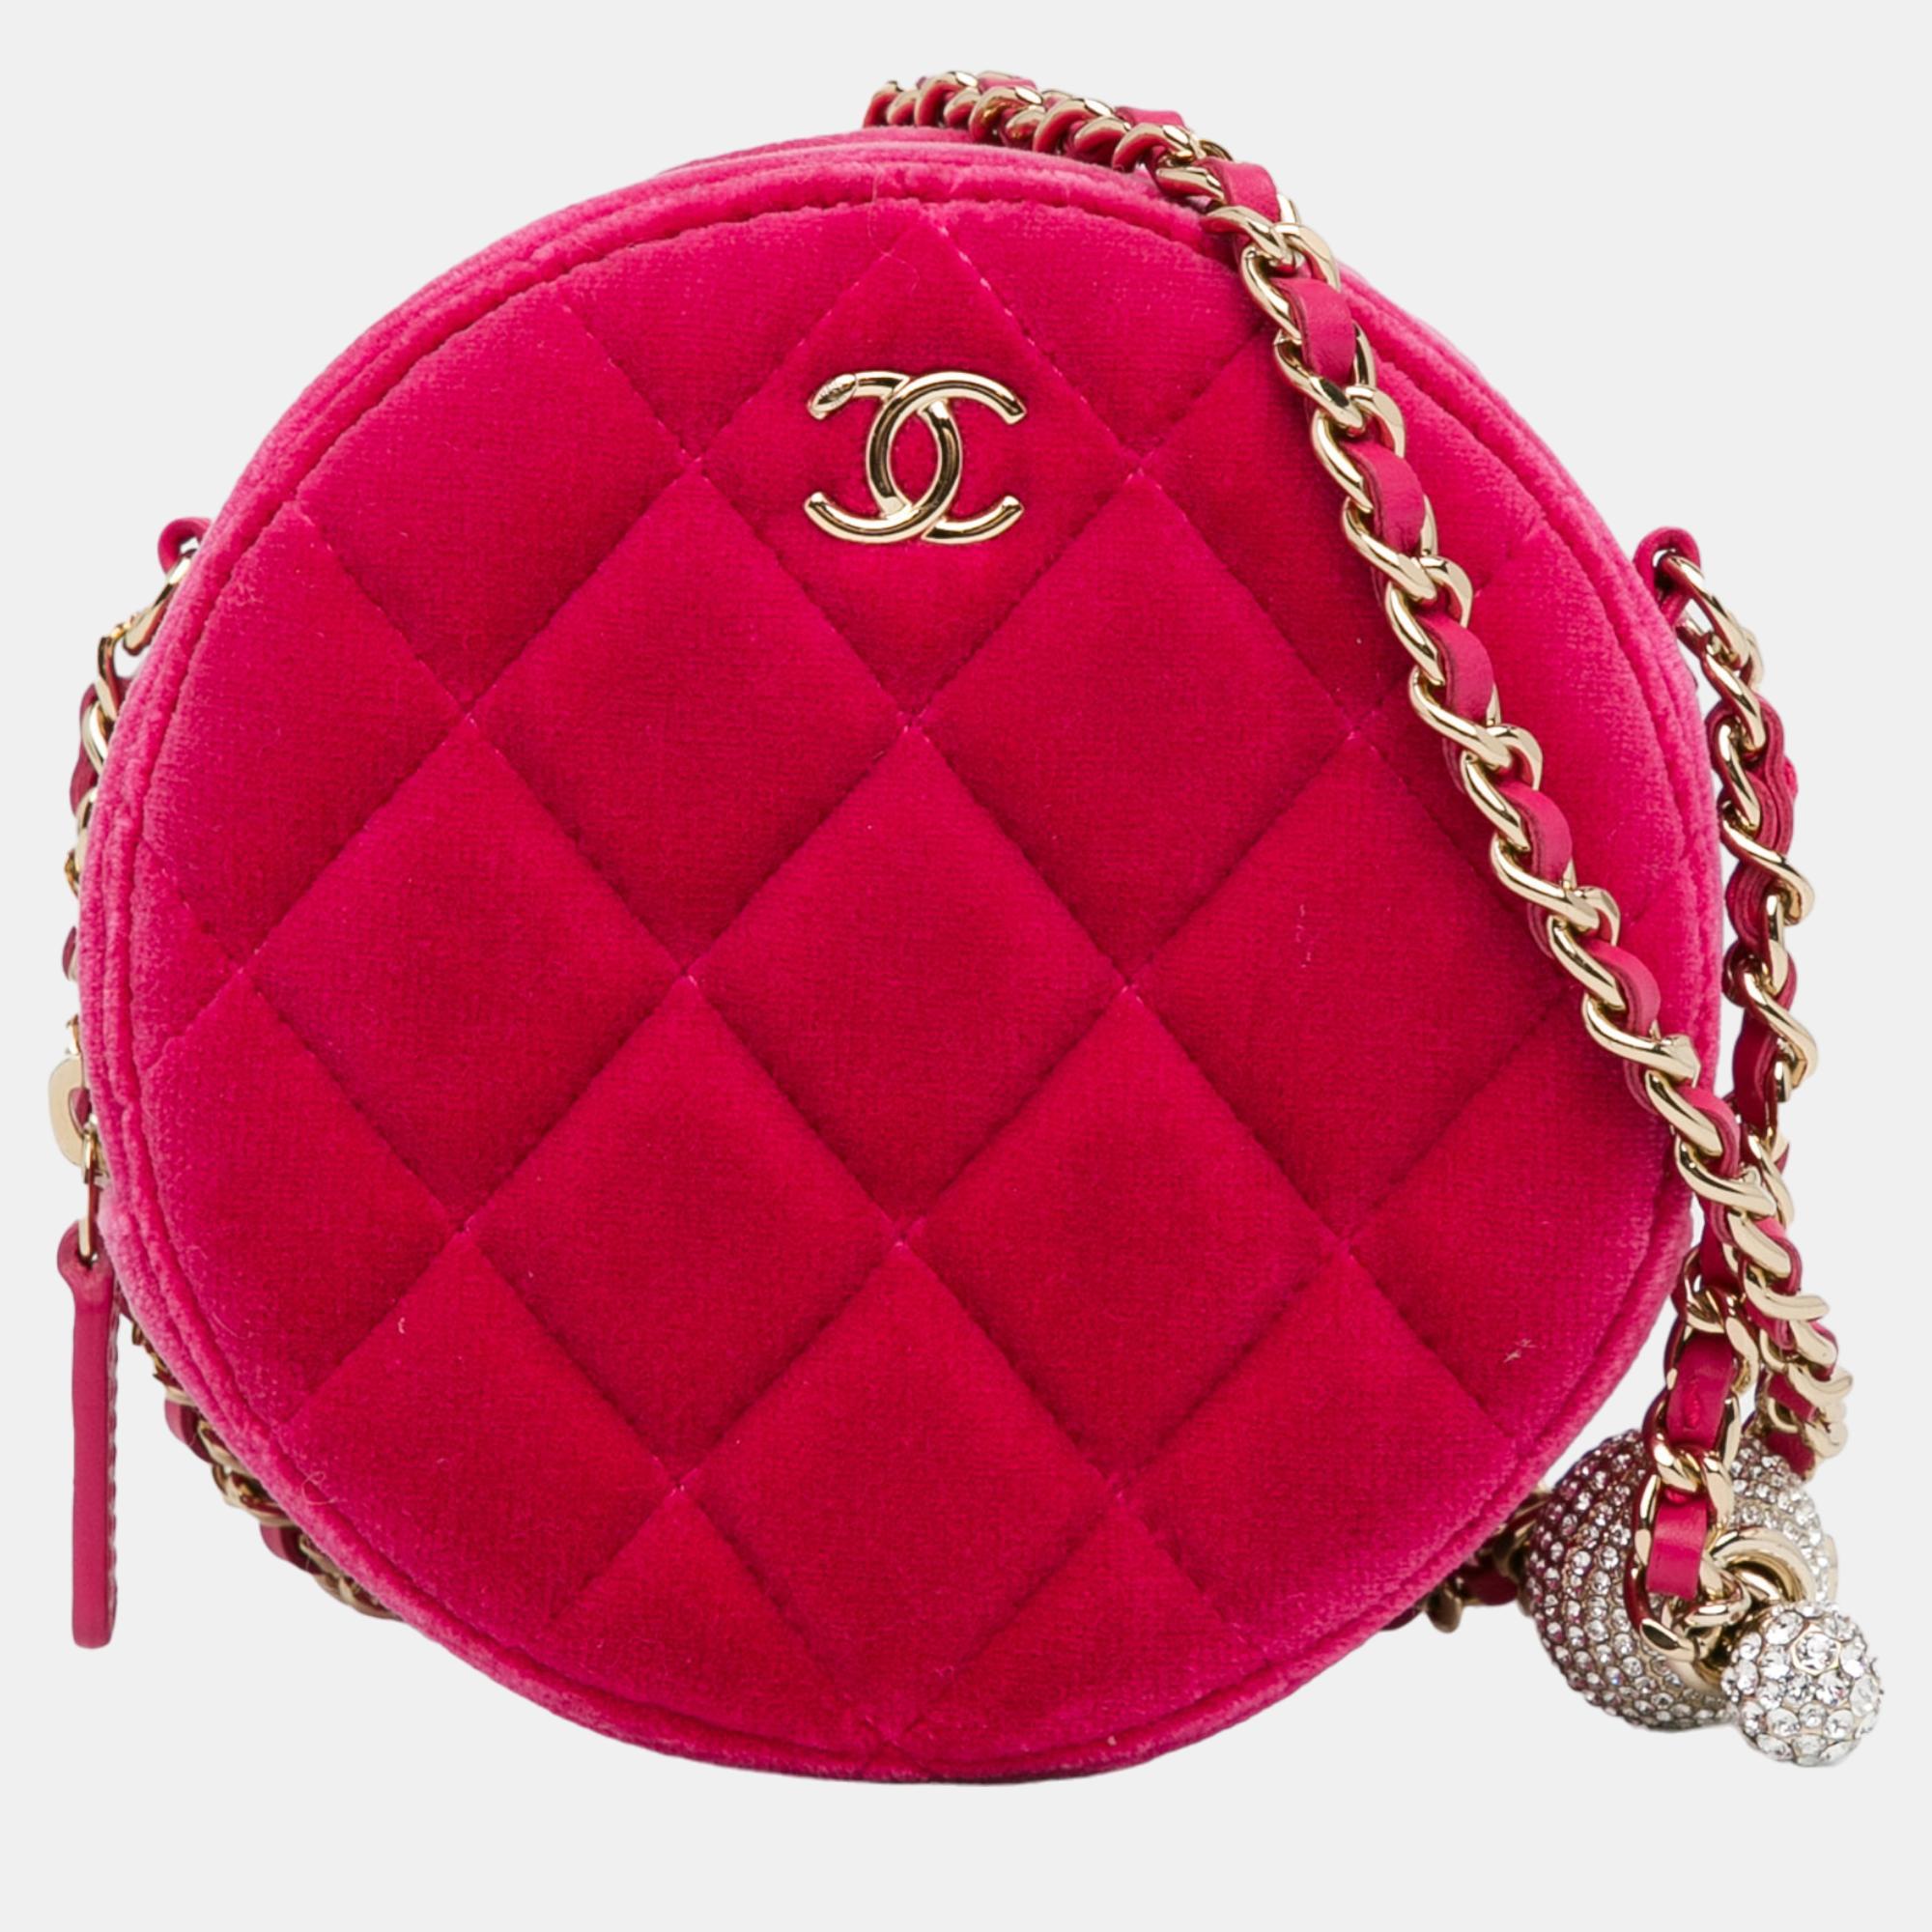 Chanel pink velvet pearl crush round clutch with chain